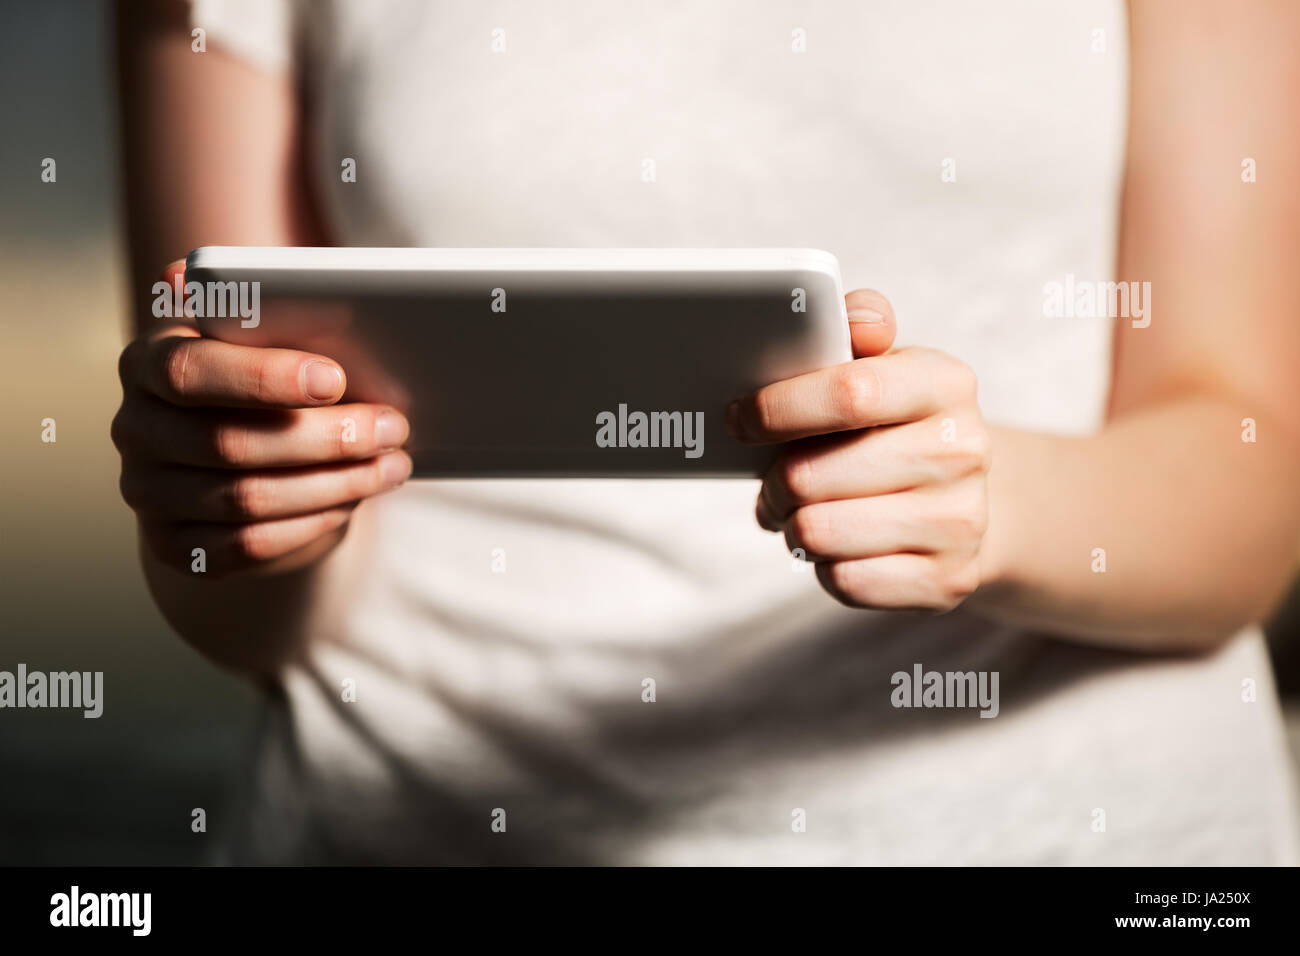 Female hands holding a digital tablet computer Stock Photo